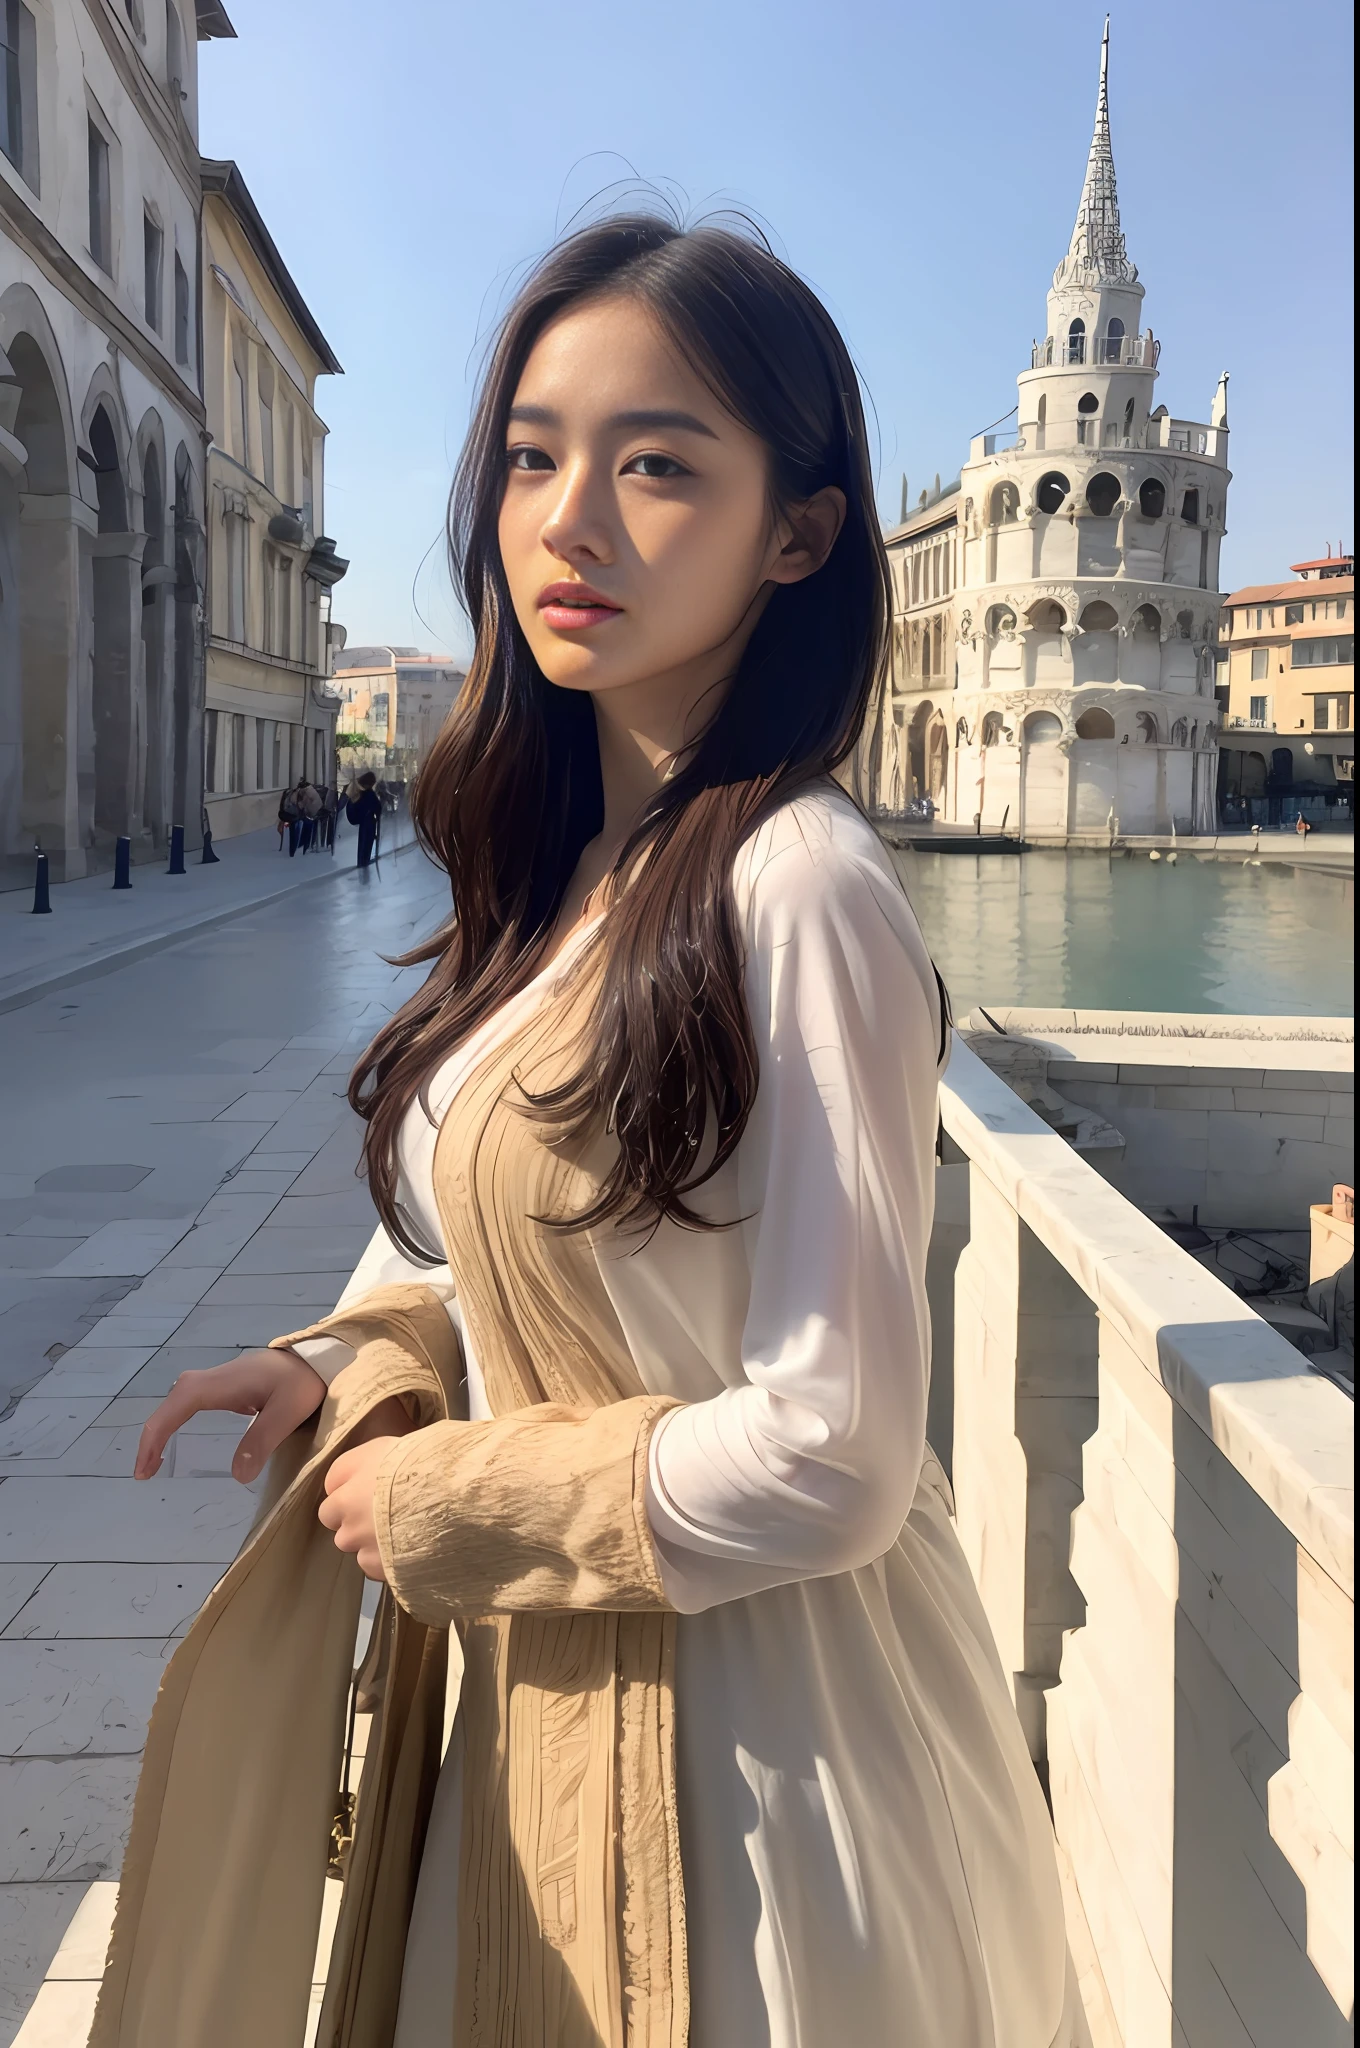 ((Best Quality, 8K, Masterpiece:1.3)), Focus: 1.2, Perfect Body Beauty: 1.4, Buttocks: 1.2, ((Layered Haircut, Breasts: 1.2)), (Wet Clothes: 1.1)  ,(Leaning Tower Of Pisa background),Bandeau Dress: 1.1, Highly Detailed Face and Skin Texture, Delicate Eyes, Double Eyelids, Whitened Skin, Long Hair